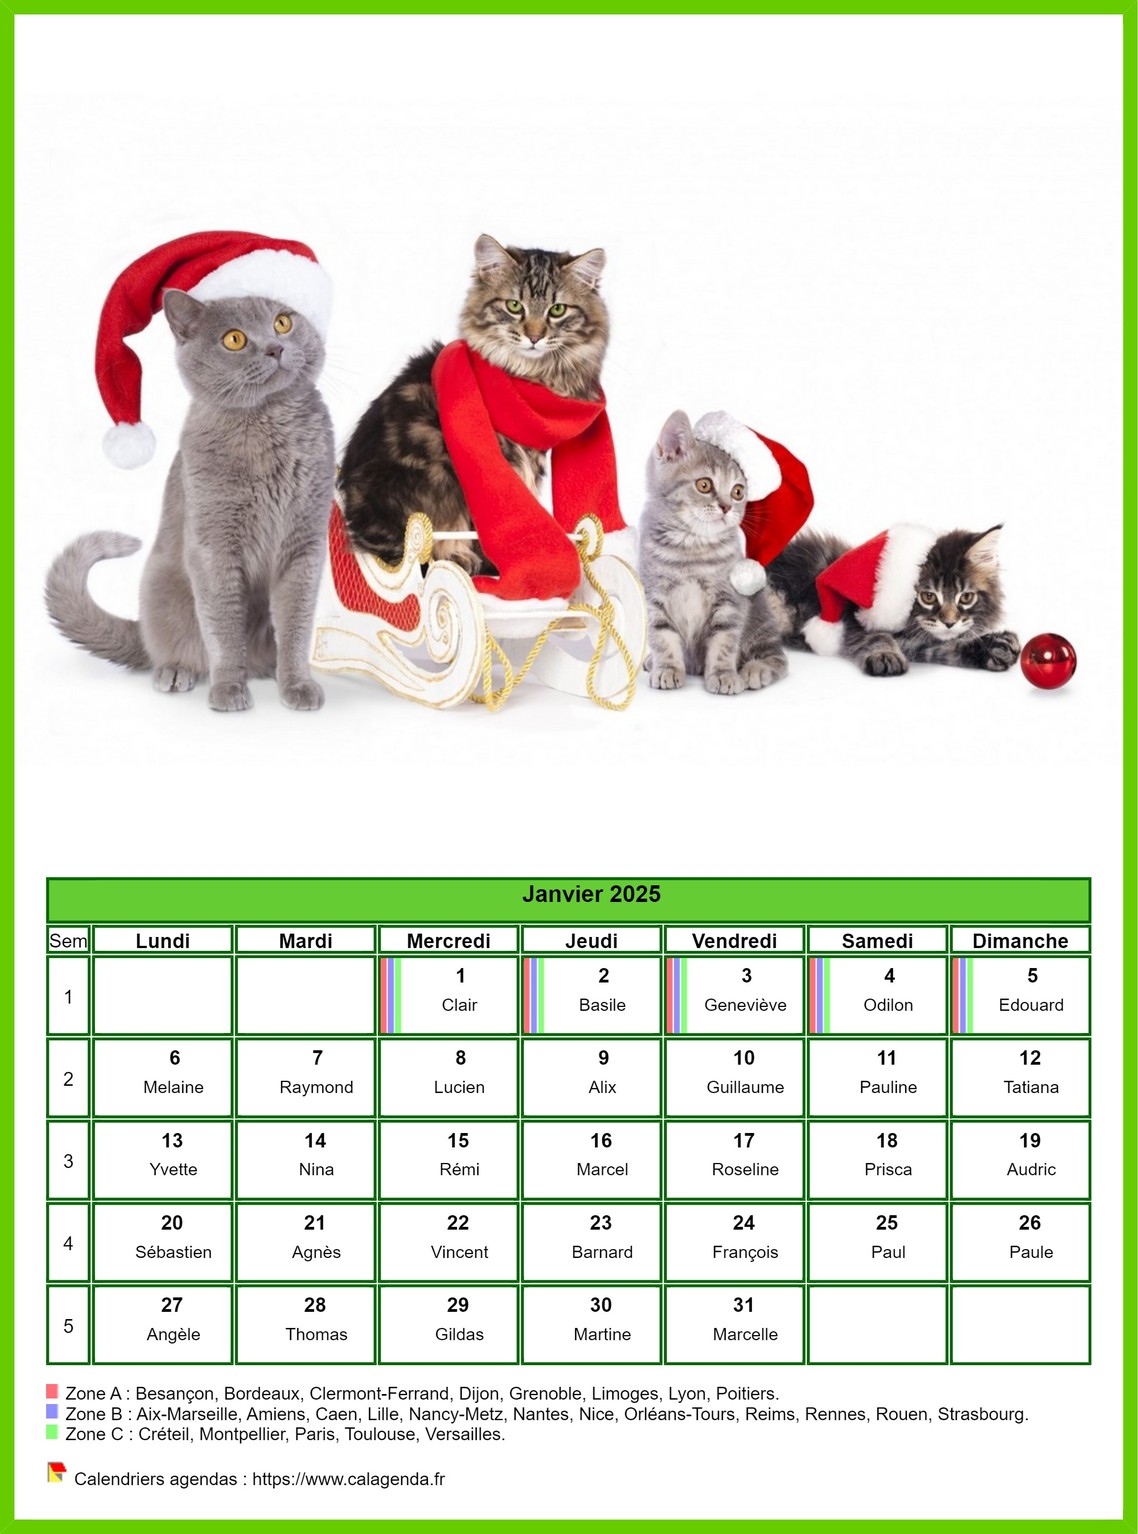 Calendrier janvier 2025 chats